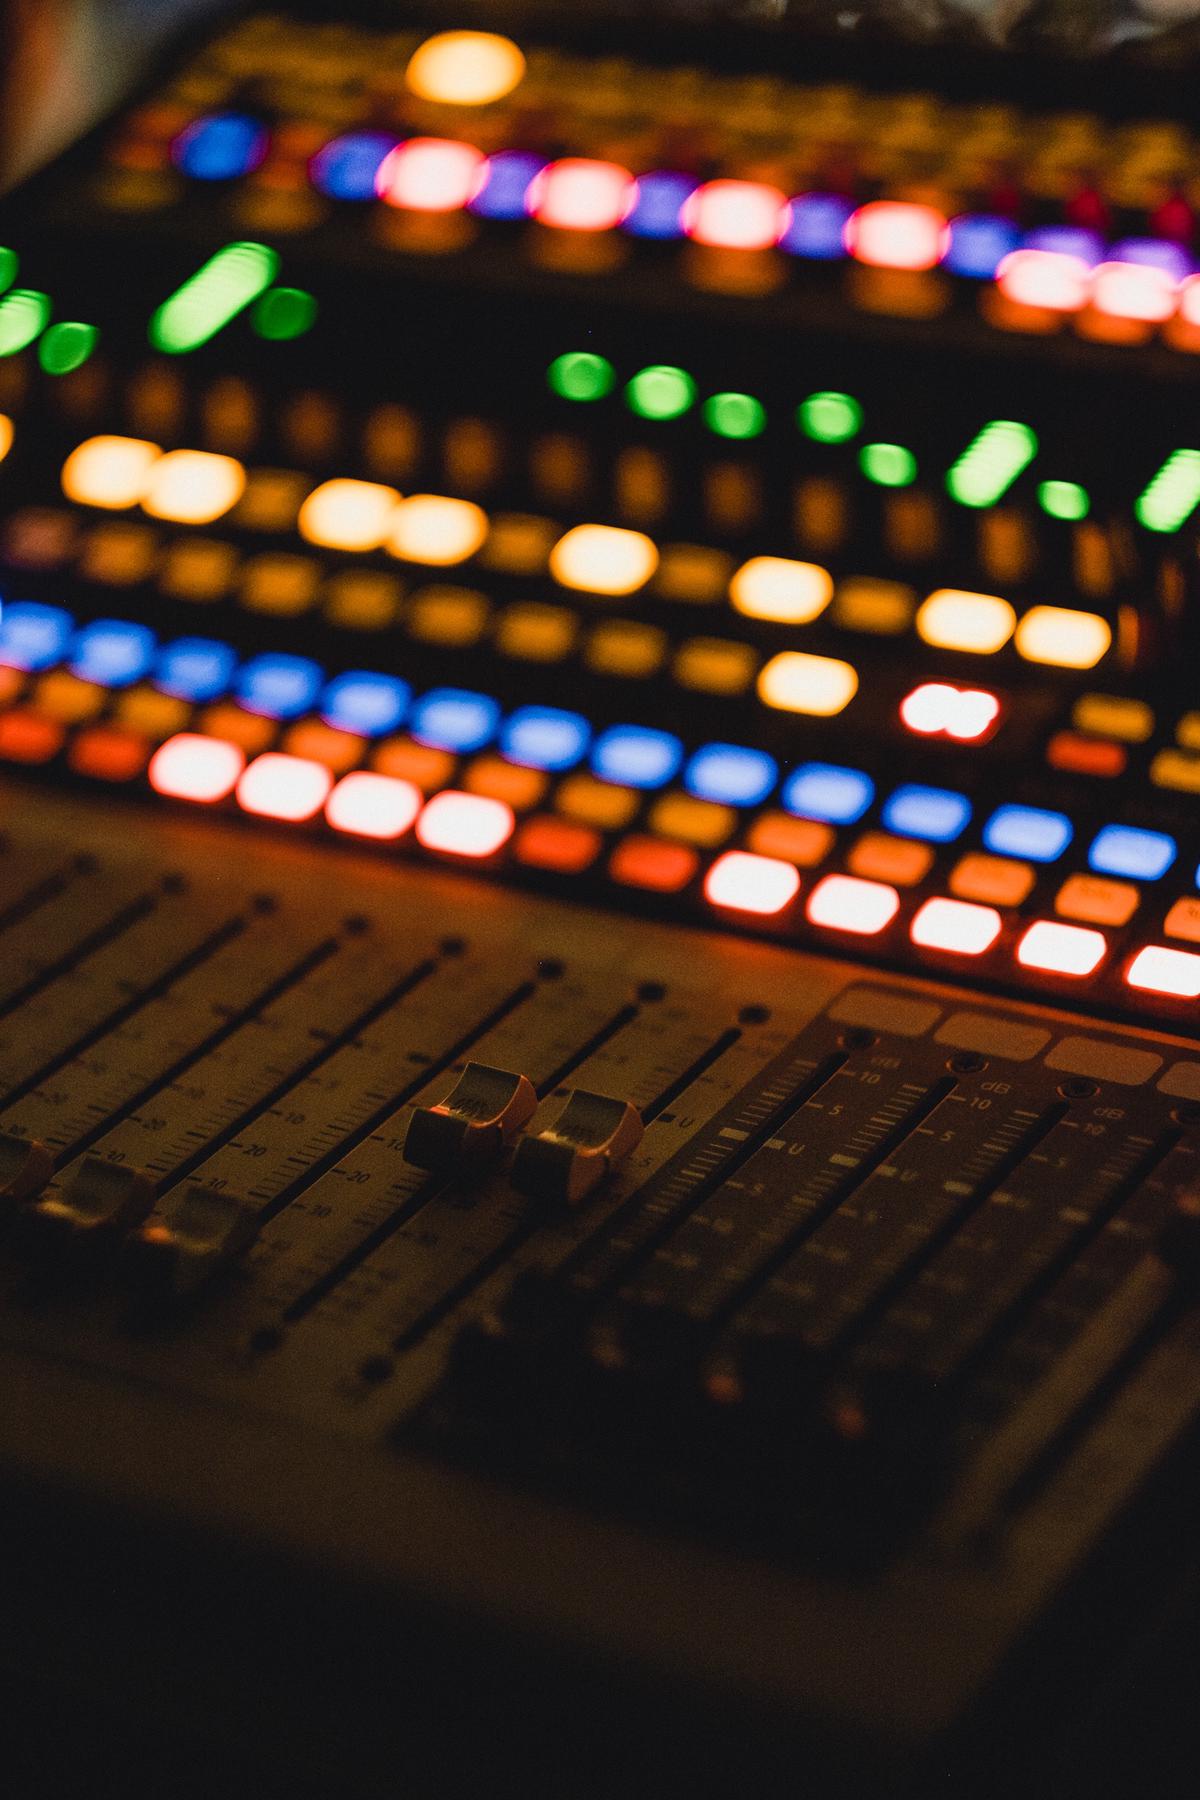 An image of a mixing board with audio waveforms representing the concept of overdubbing in music production.